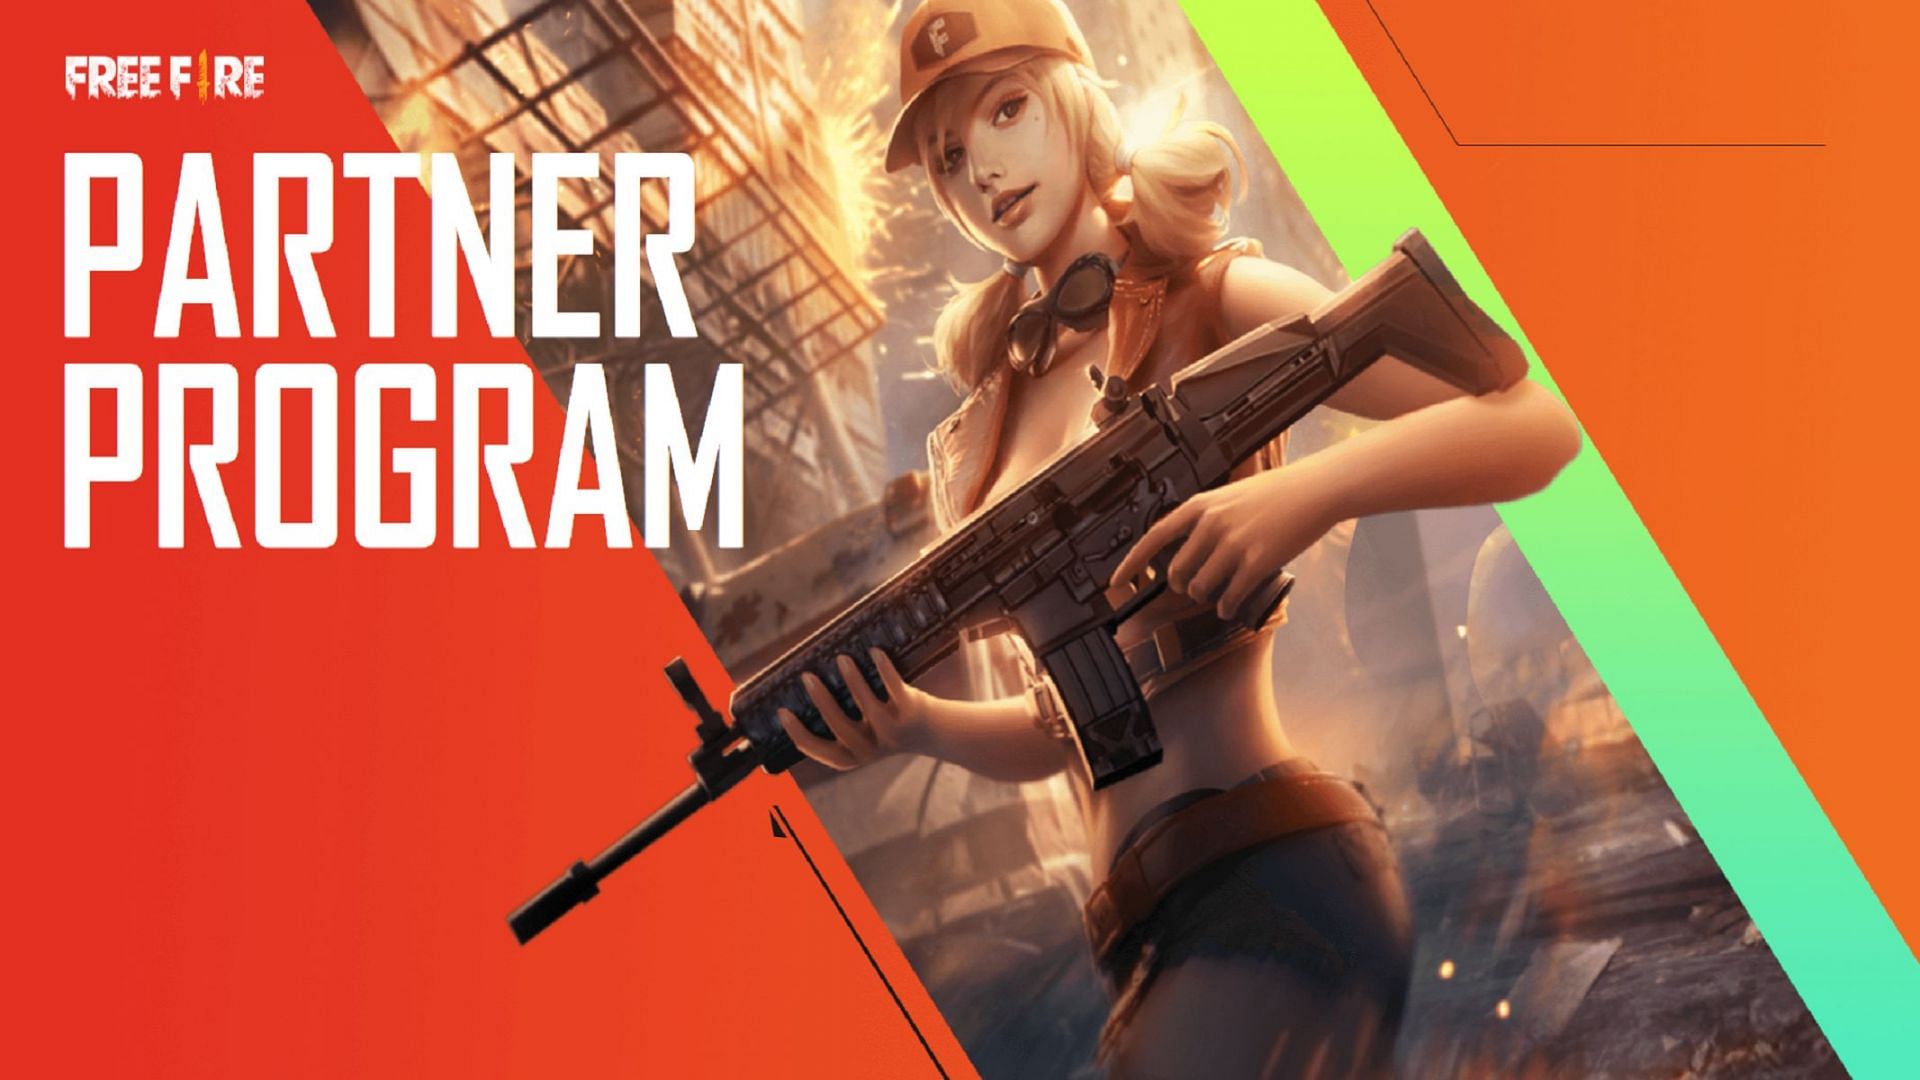 All details on the Free Fire Partner Program (Image via Free Fire)